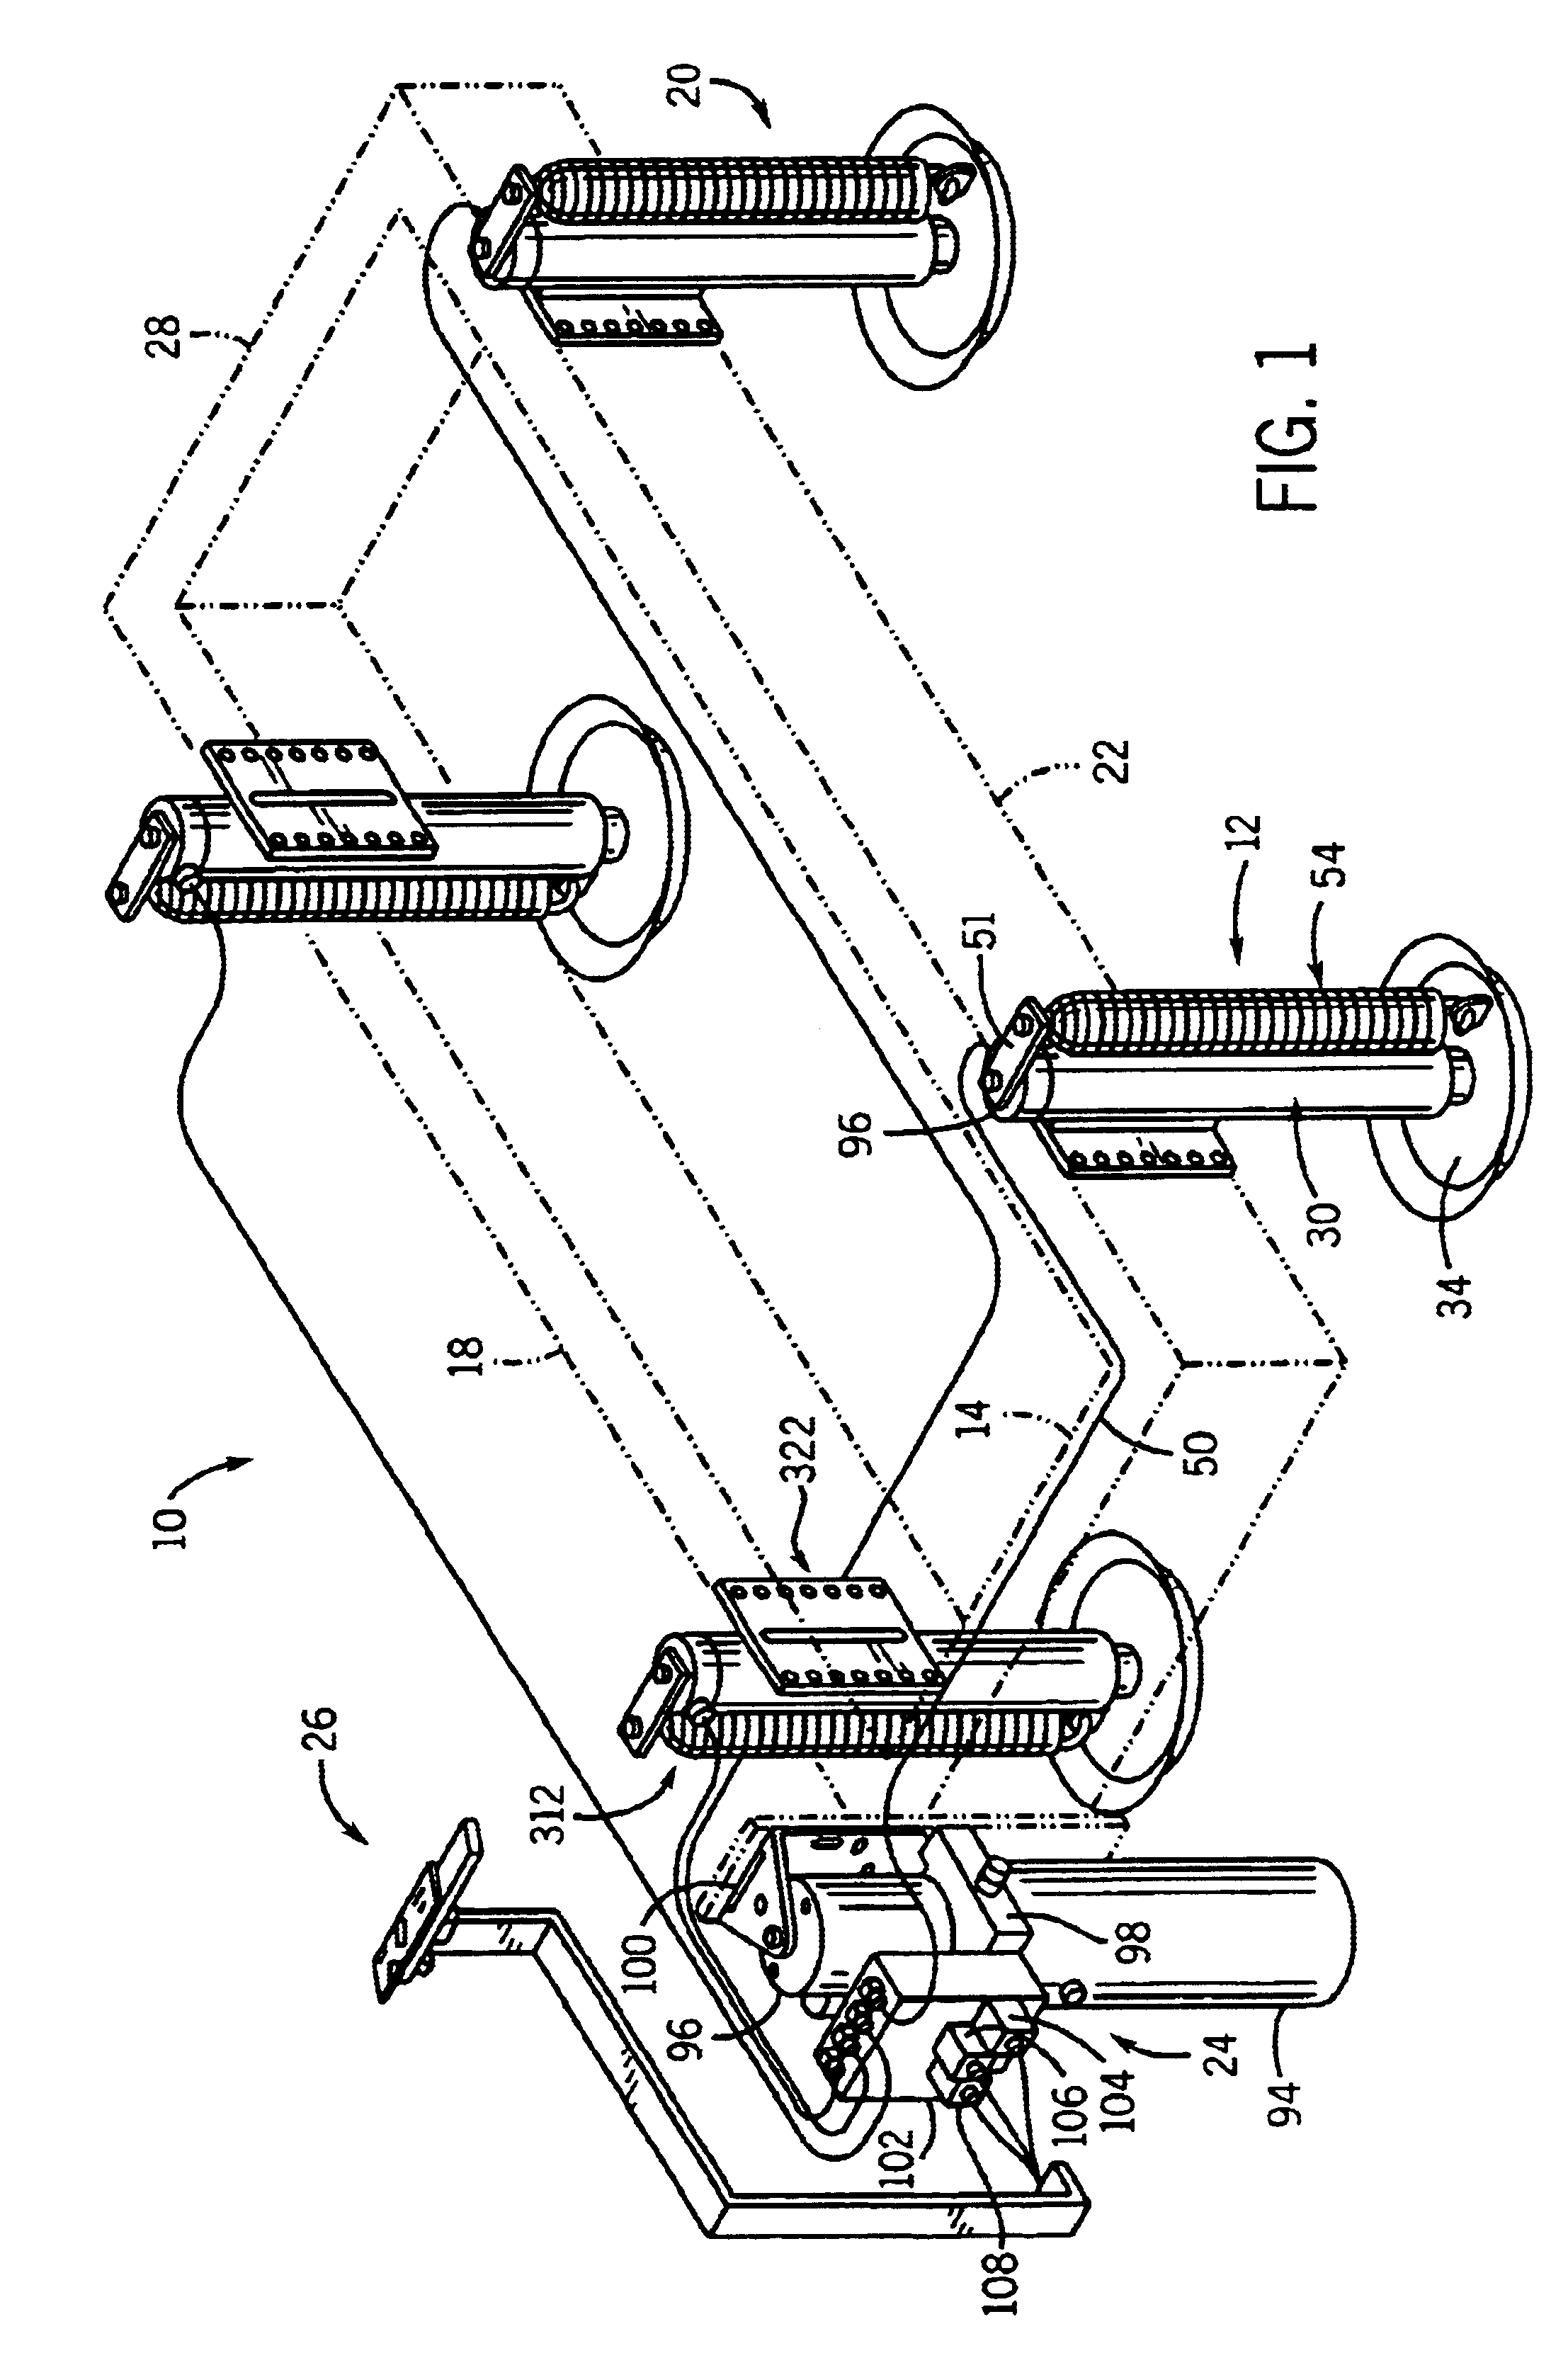 Pseudo four-leg vehicle leveling system with independent leg lock-out